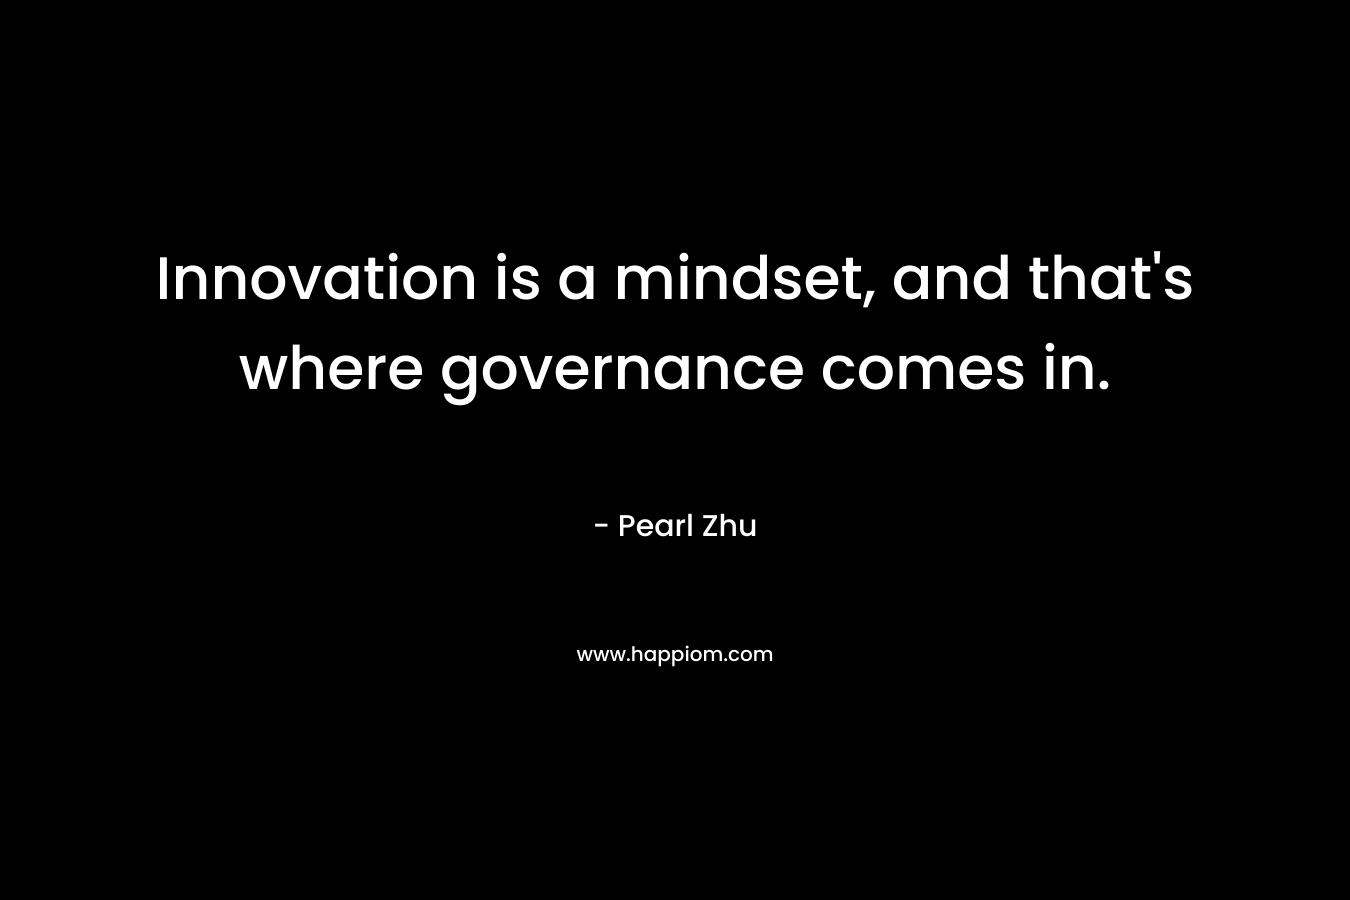 Innovation is a mindset, and that’s where governance comes in. – Pearl Zhu